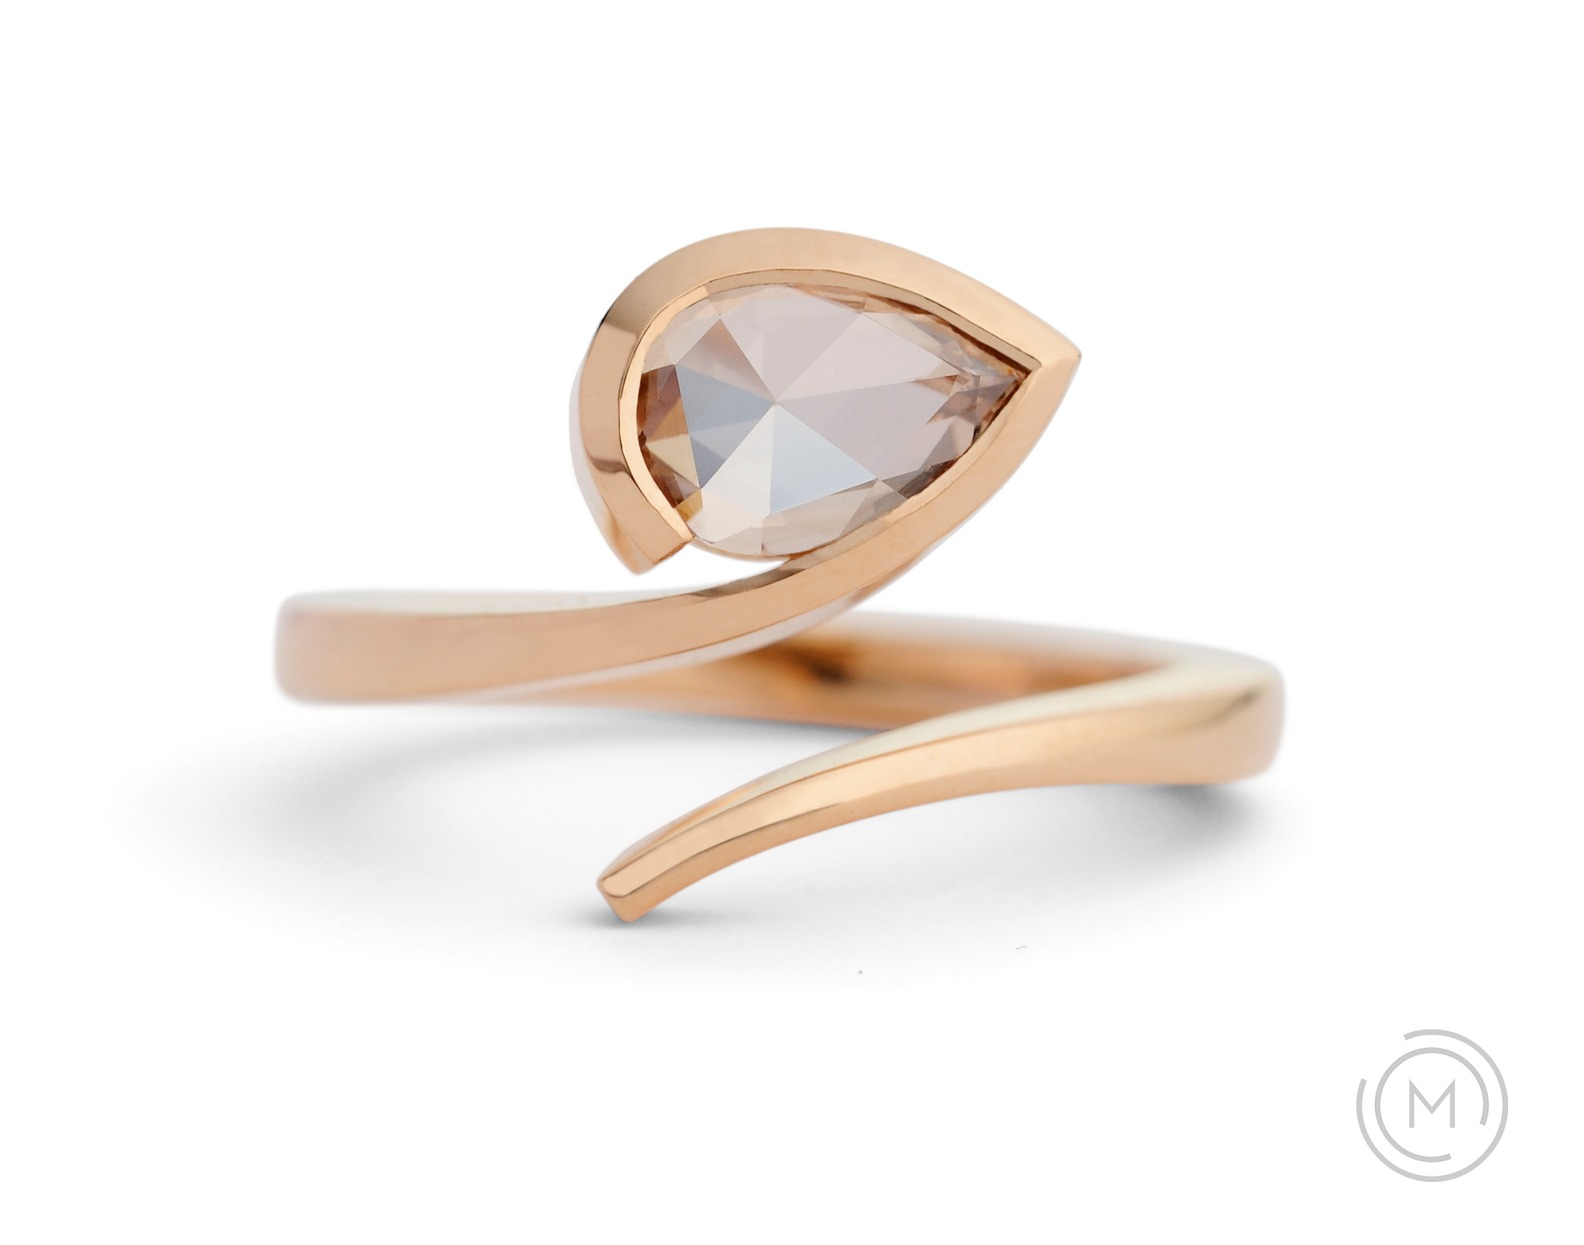 Rose cut pear cognac diamond engagement ring made from brushed rose gold - McCaul Goldsmiths London